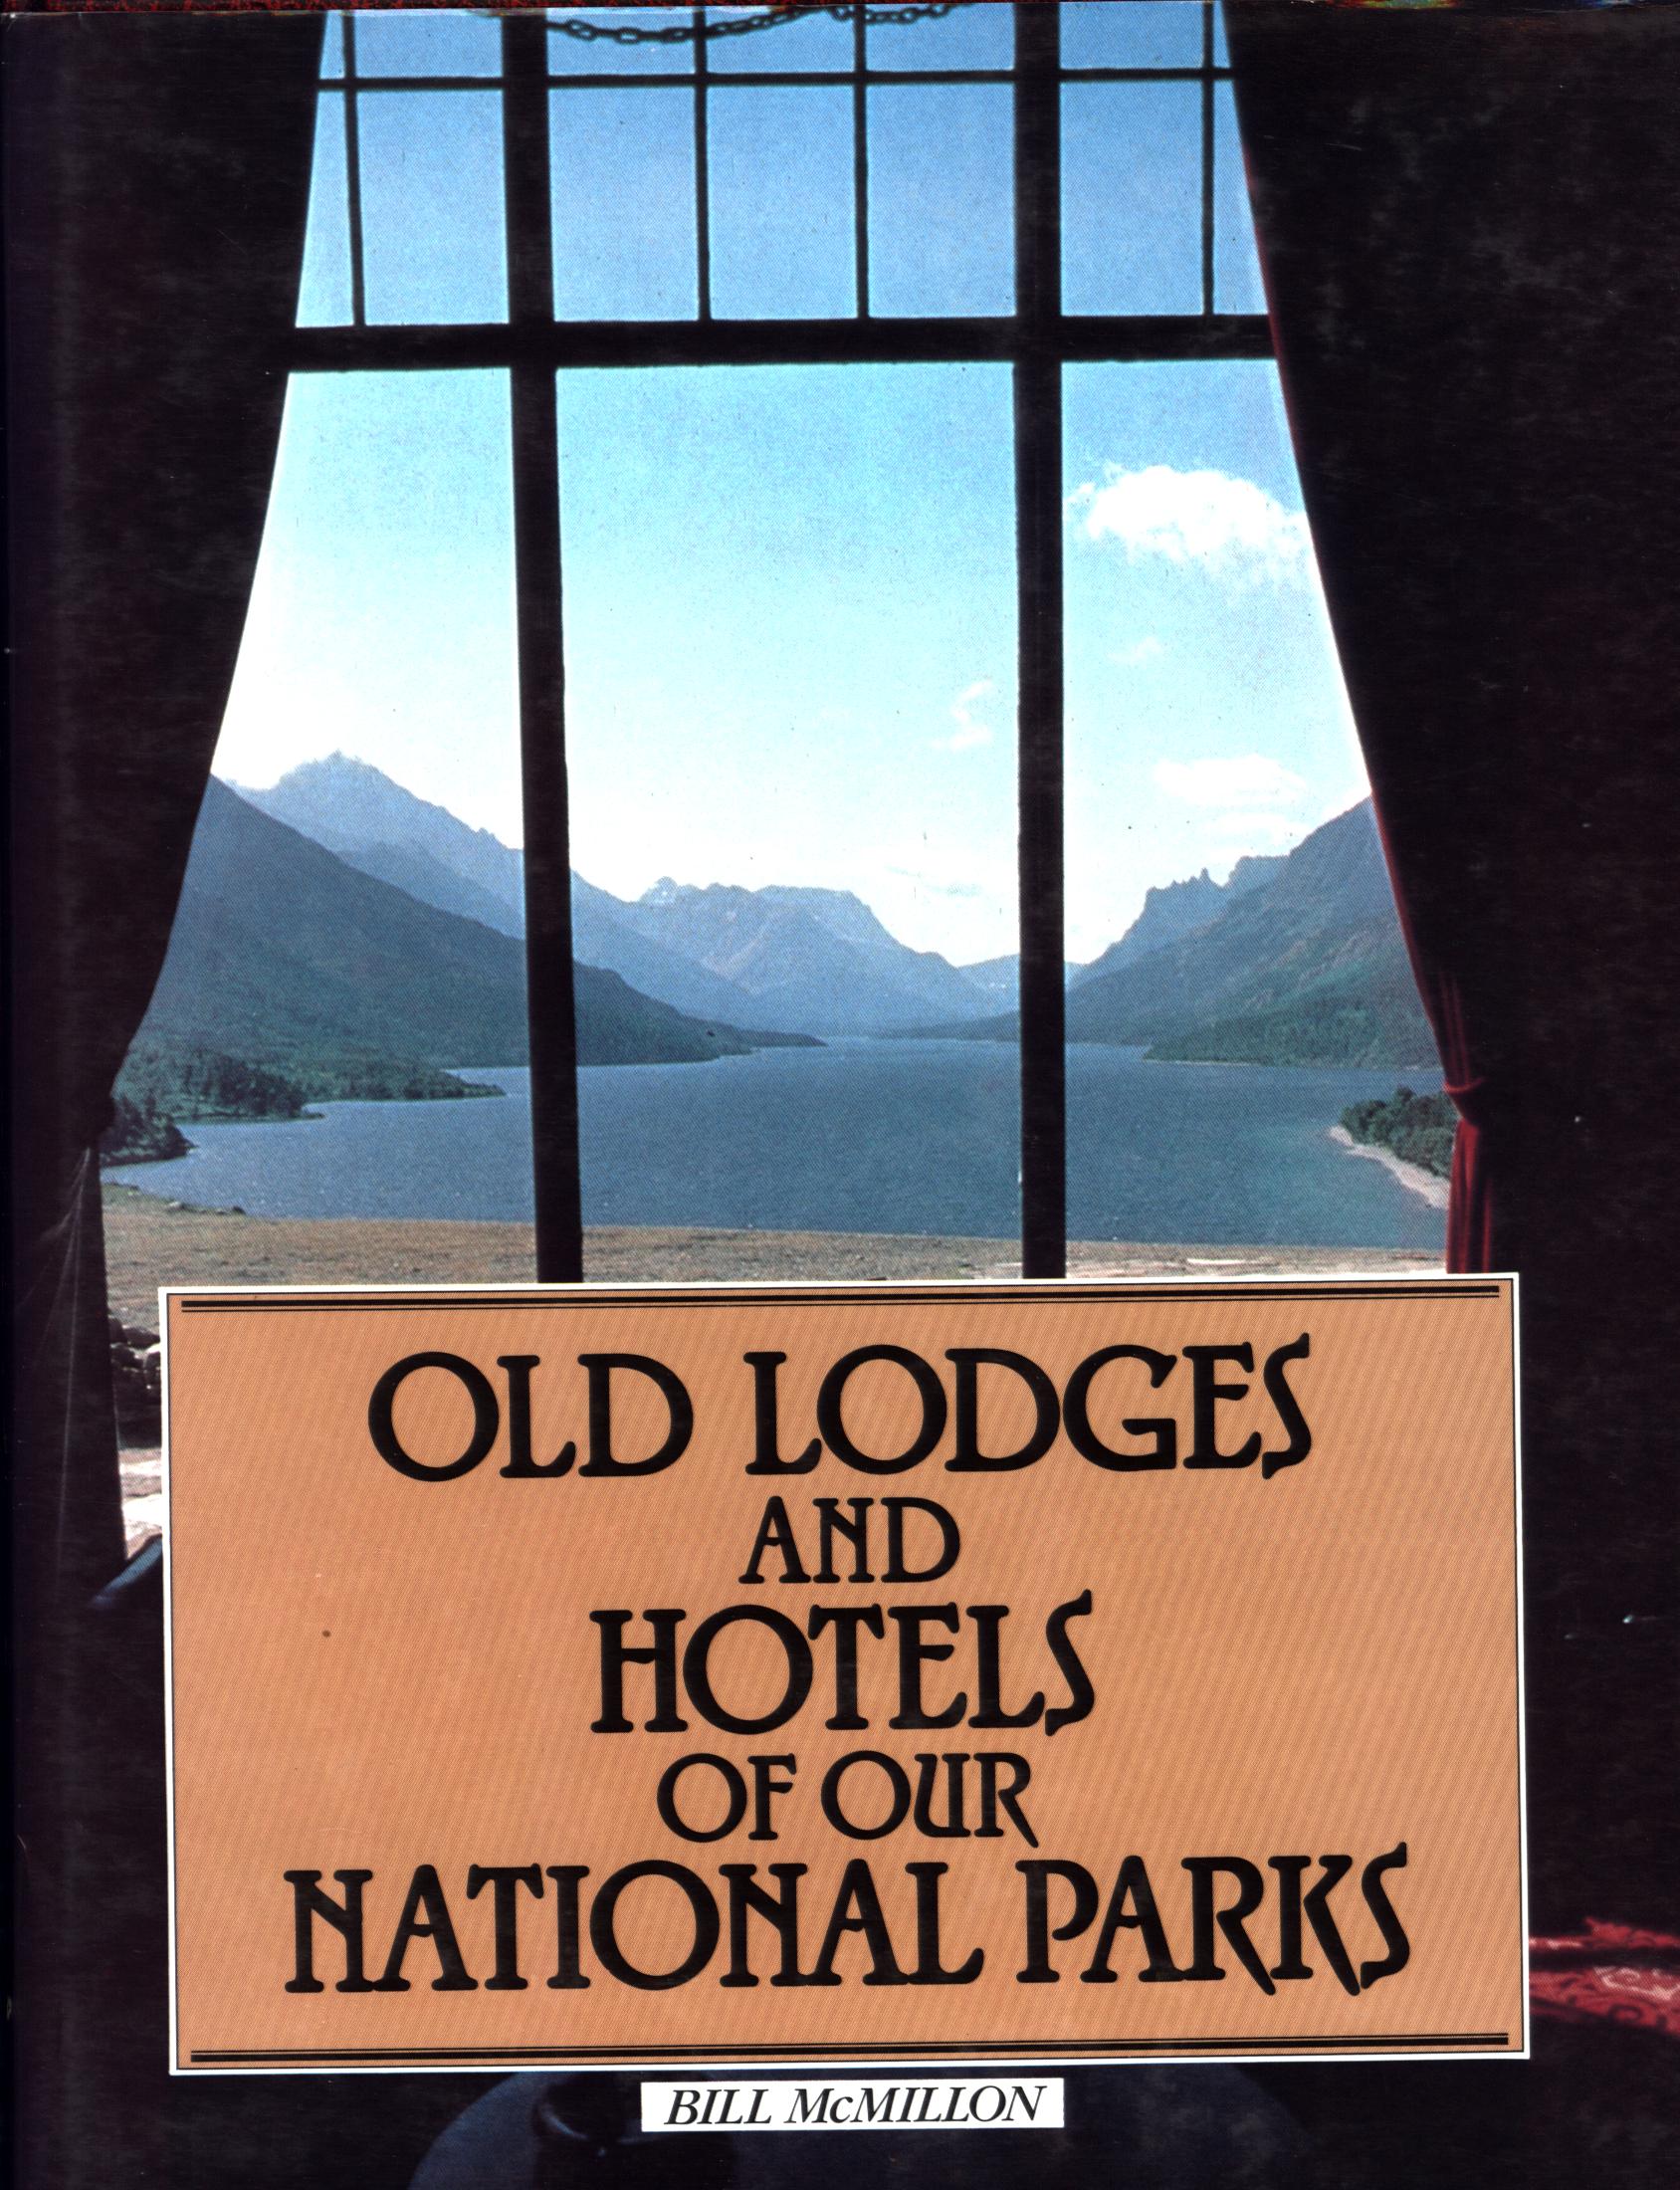 OLD LODGES AND HOTELS OF OUR NATIONAL PARKS.